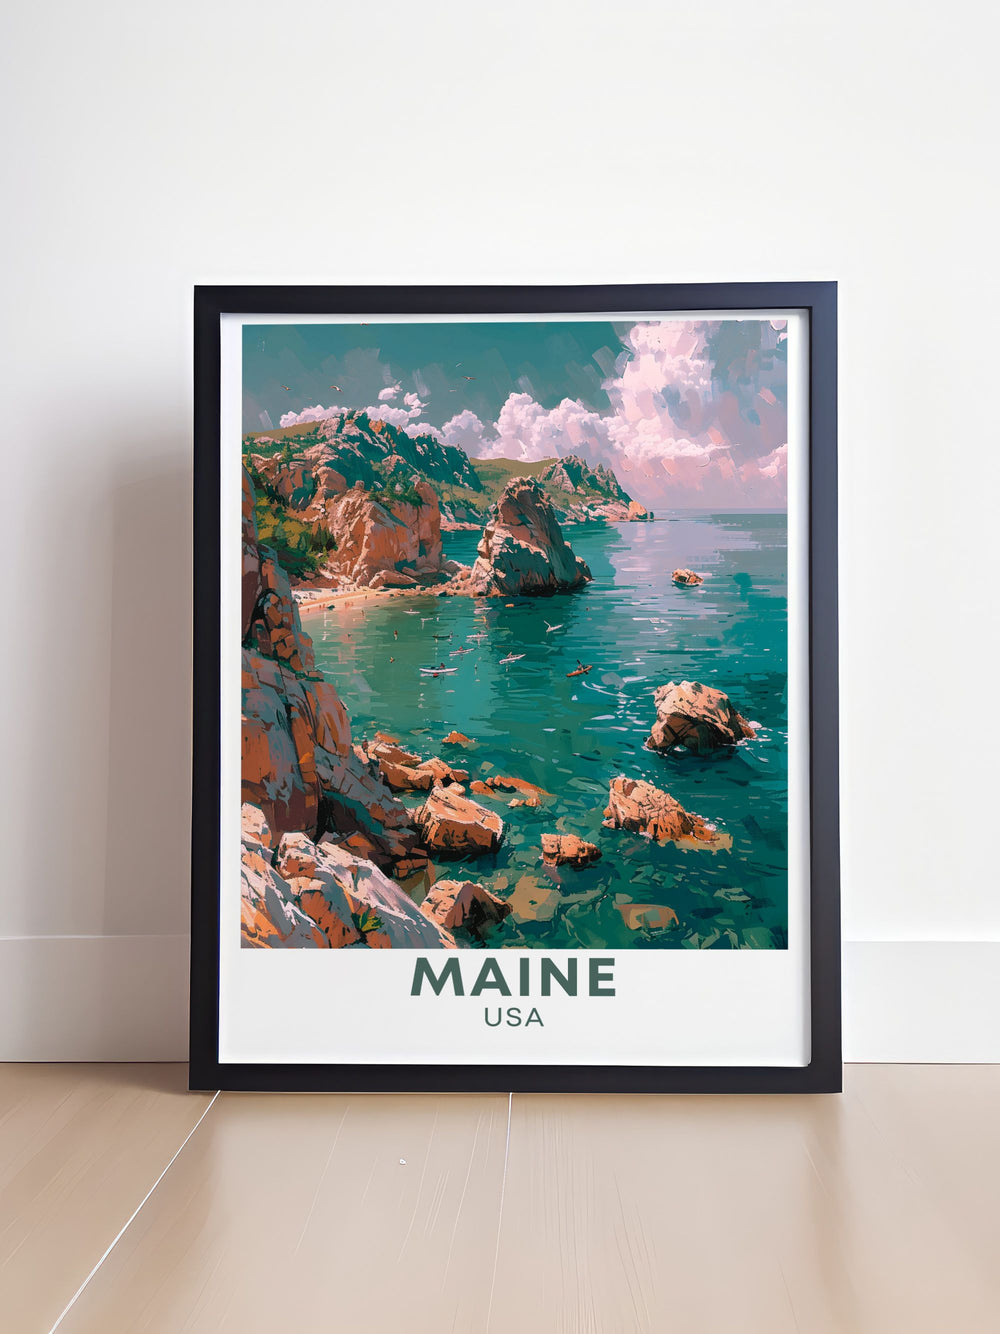 Highlighting the rich history of Acadia National Park, this poster captures the parks establishment as the first national park east of the Mississippi River and its development by influential figures like John D. Rockefeller Jr. Perfect for history enthusiasts, this artwork brings the storied past of Acadia into your home decor.